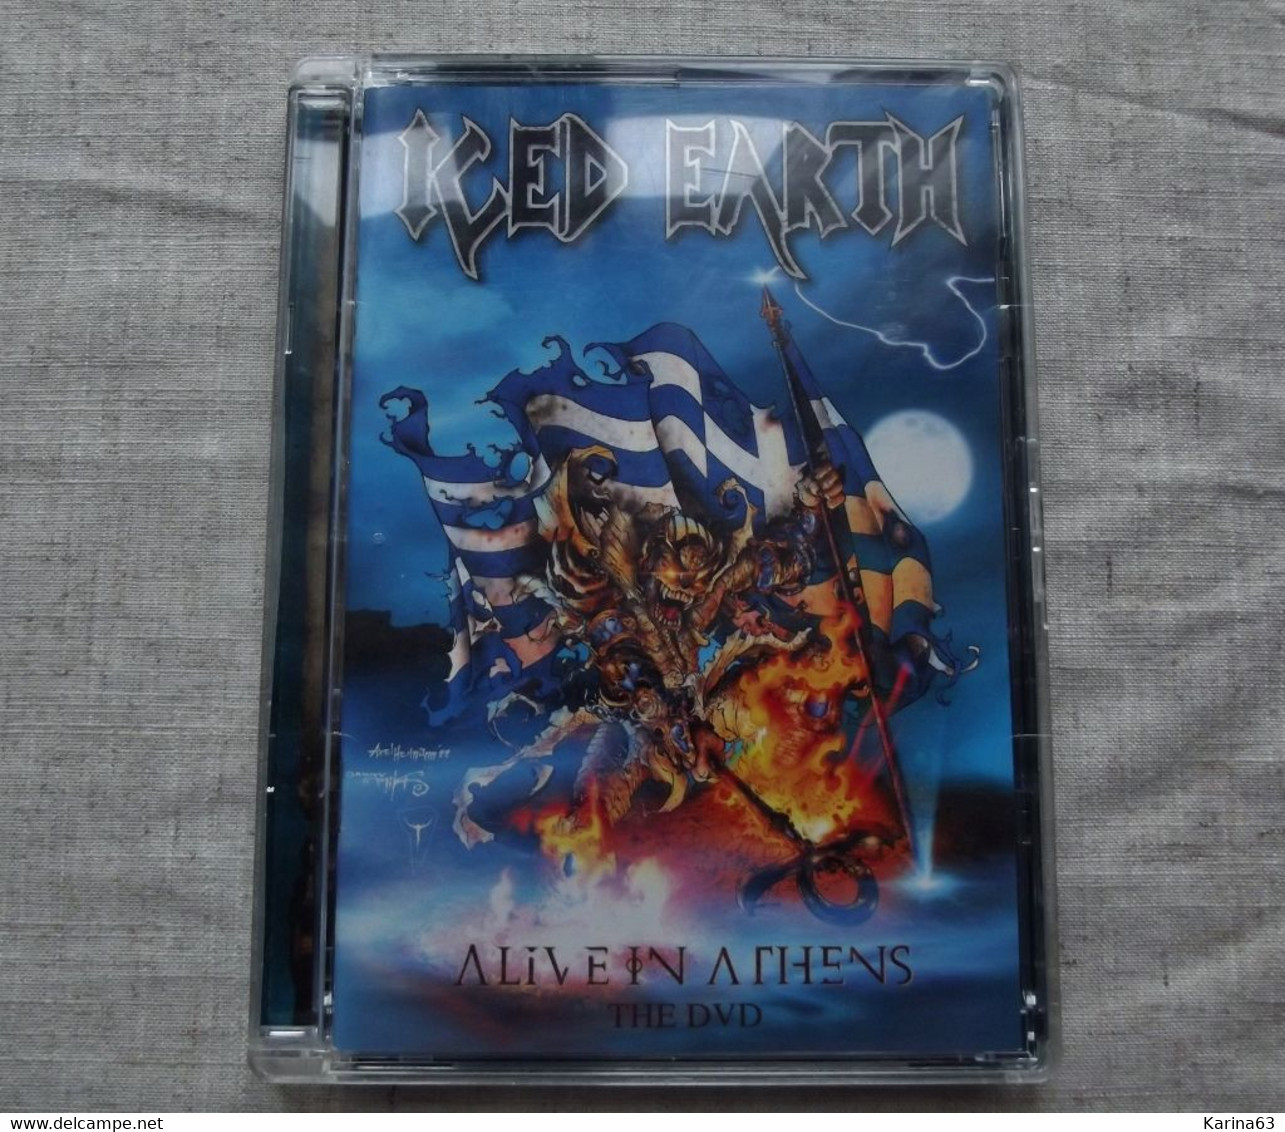 Iced Earth - Alive In Athens - 2007 - DVD Musicaux